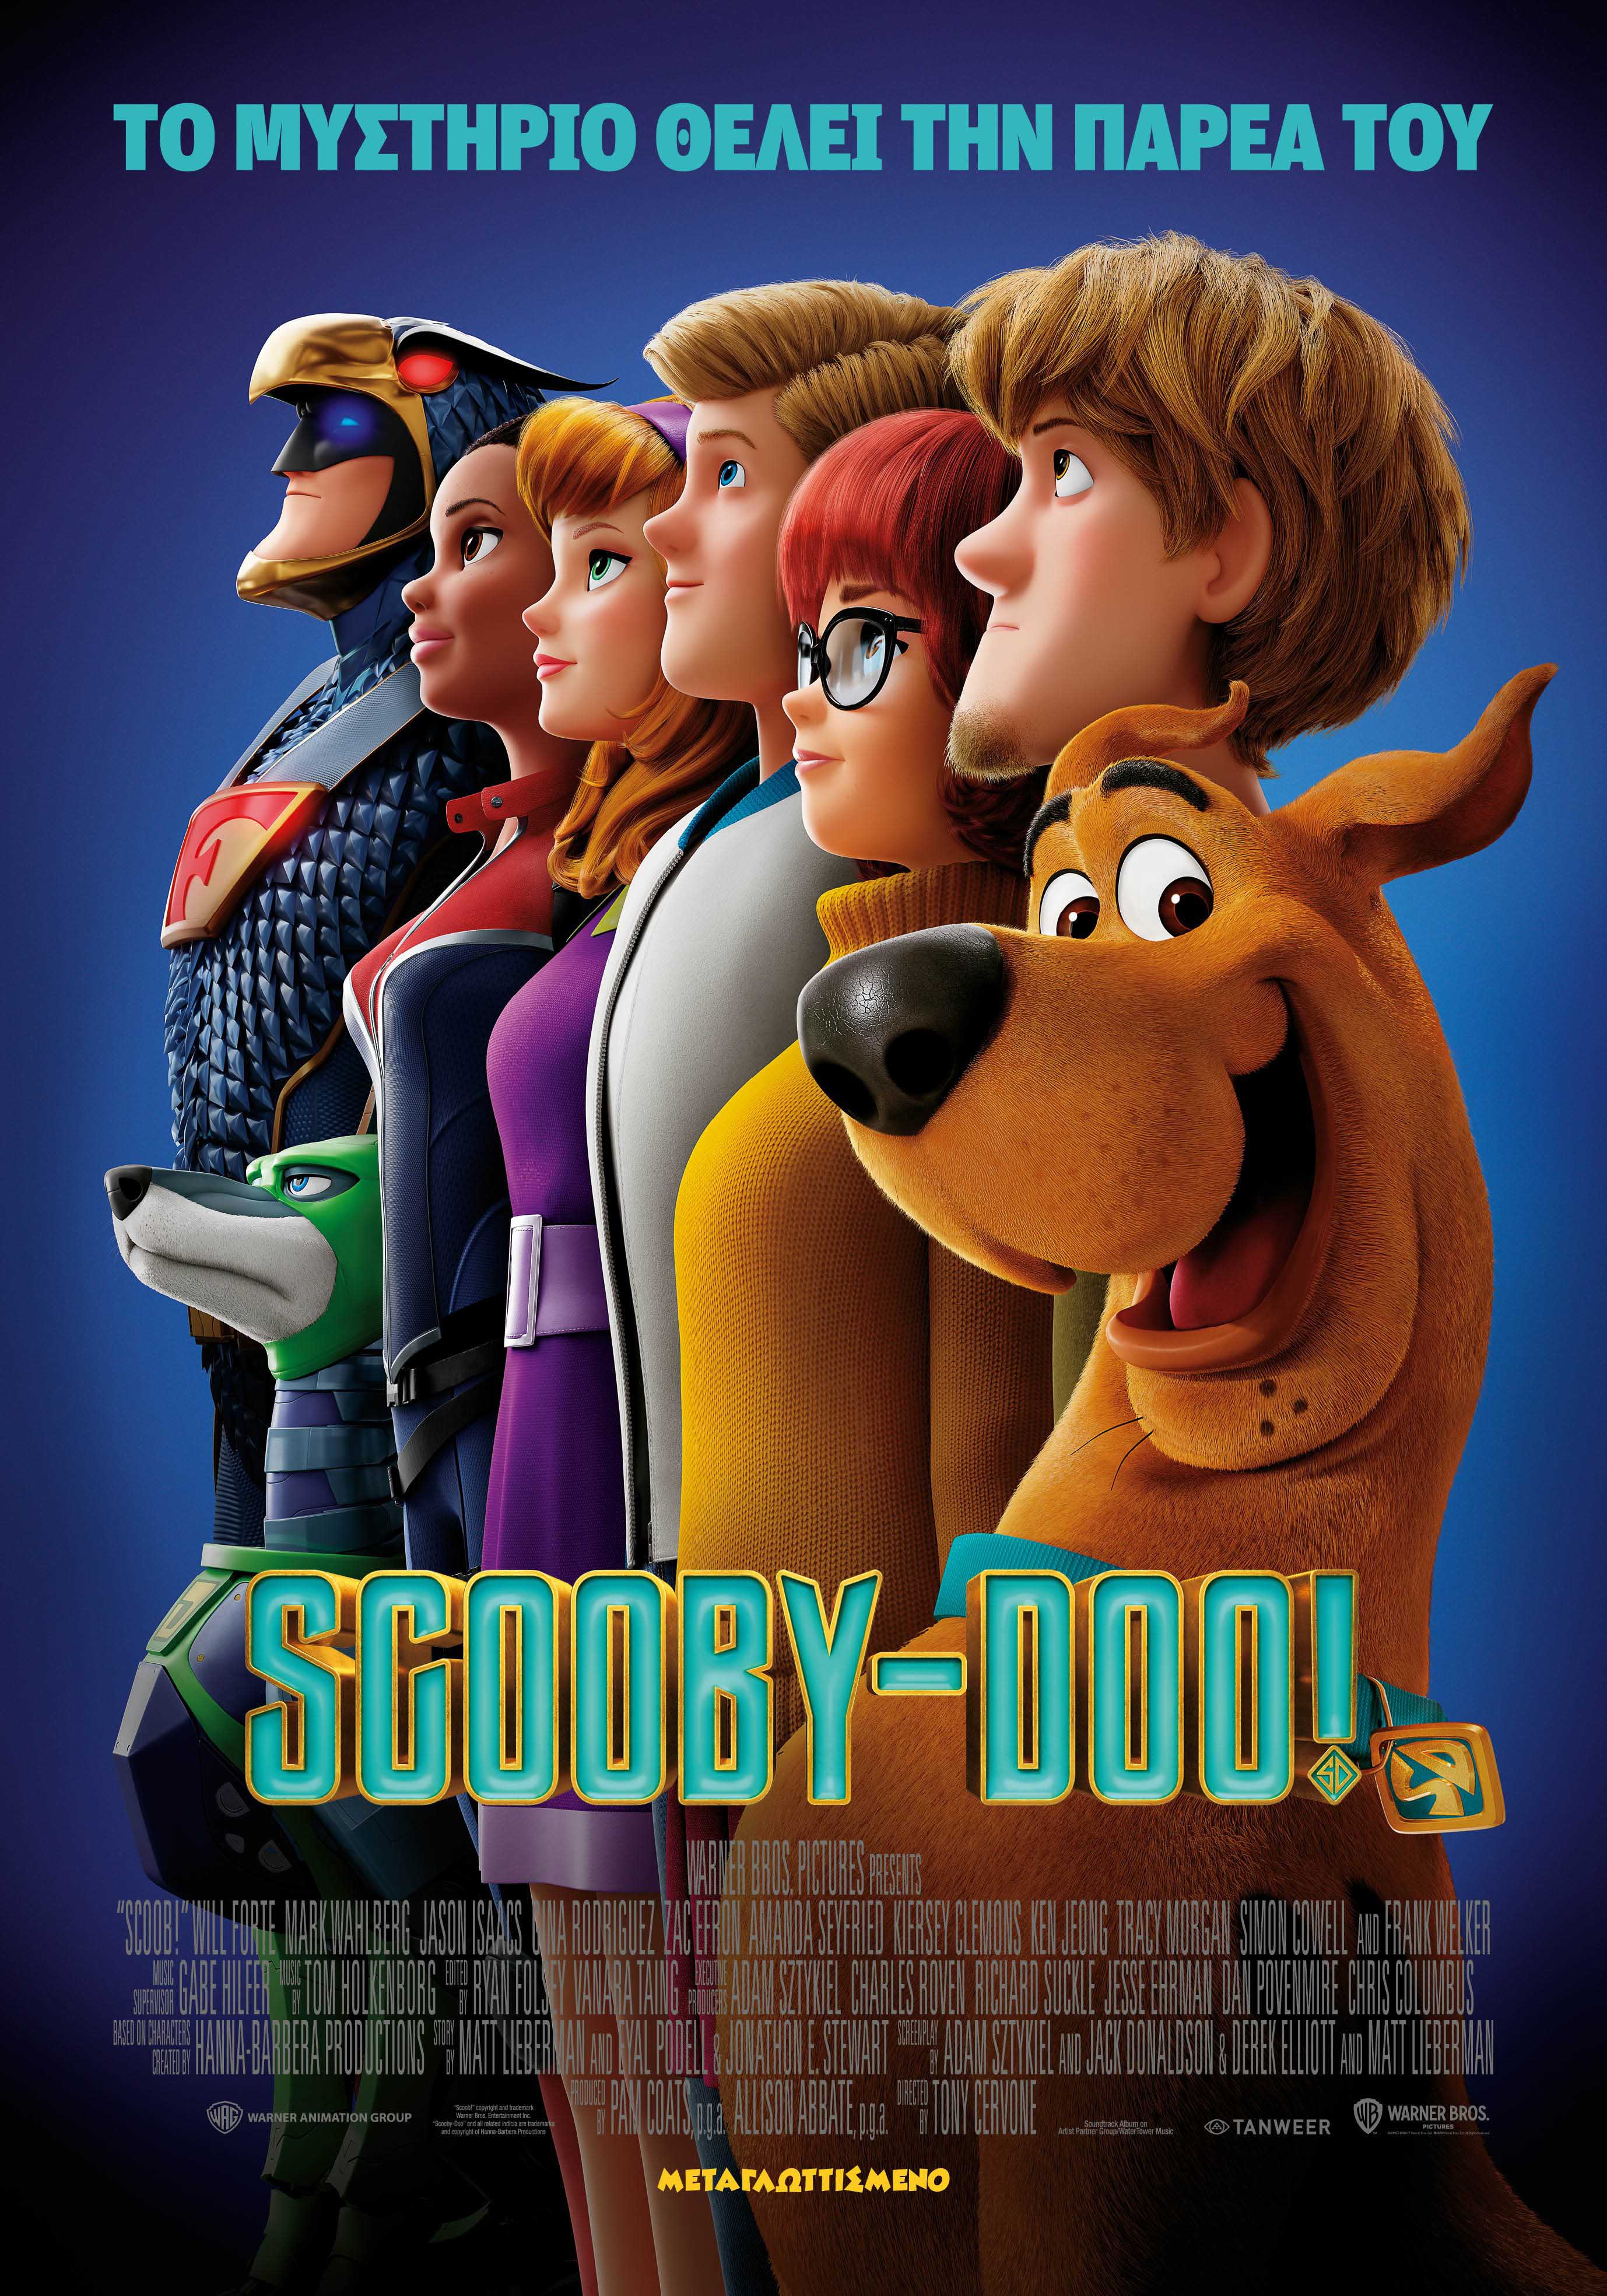 SCOOBY DOO Official Poster